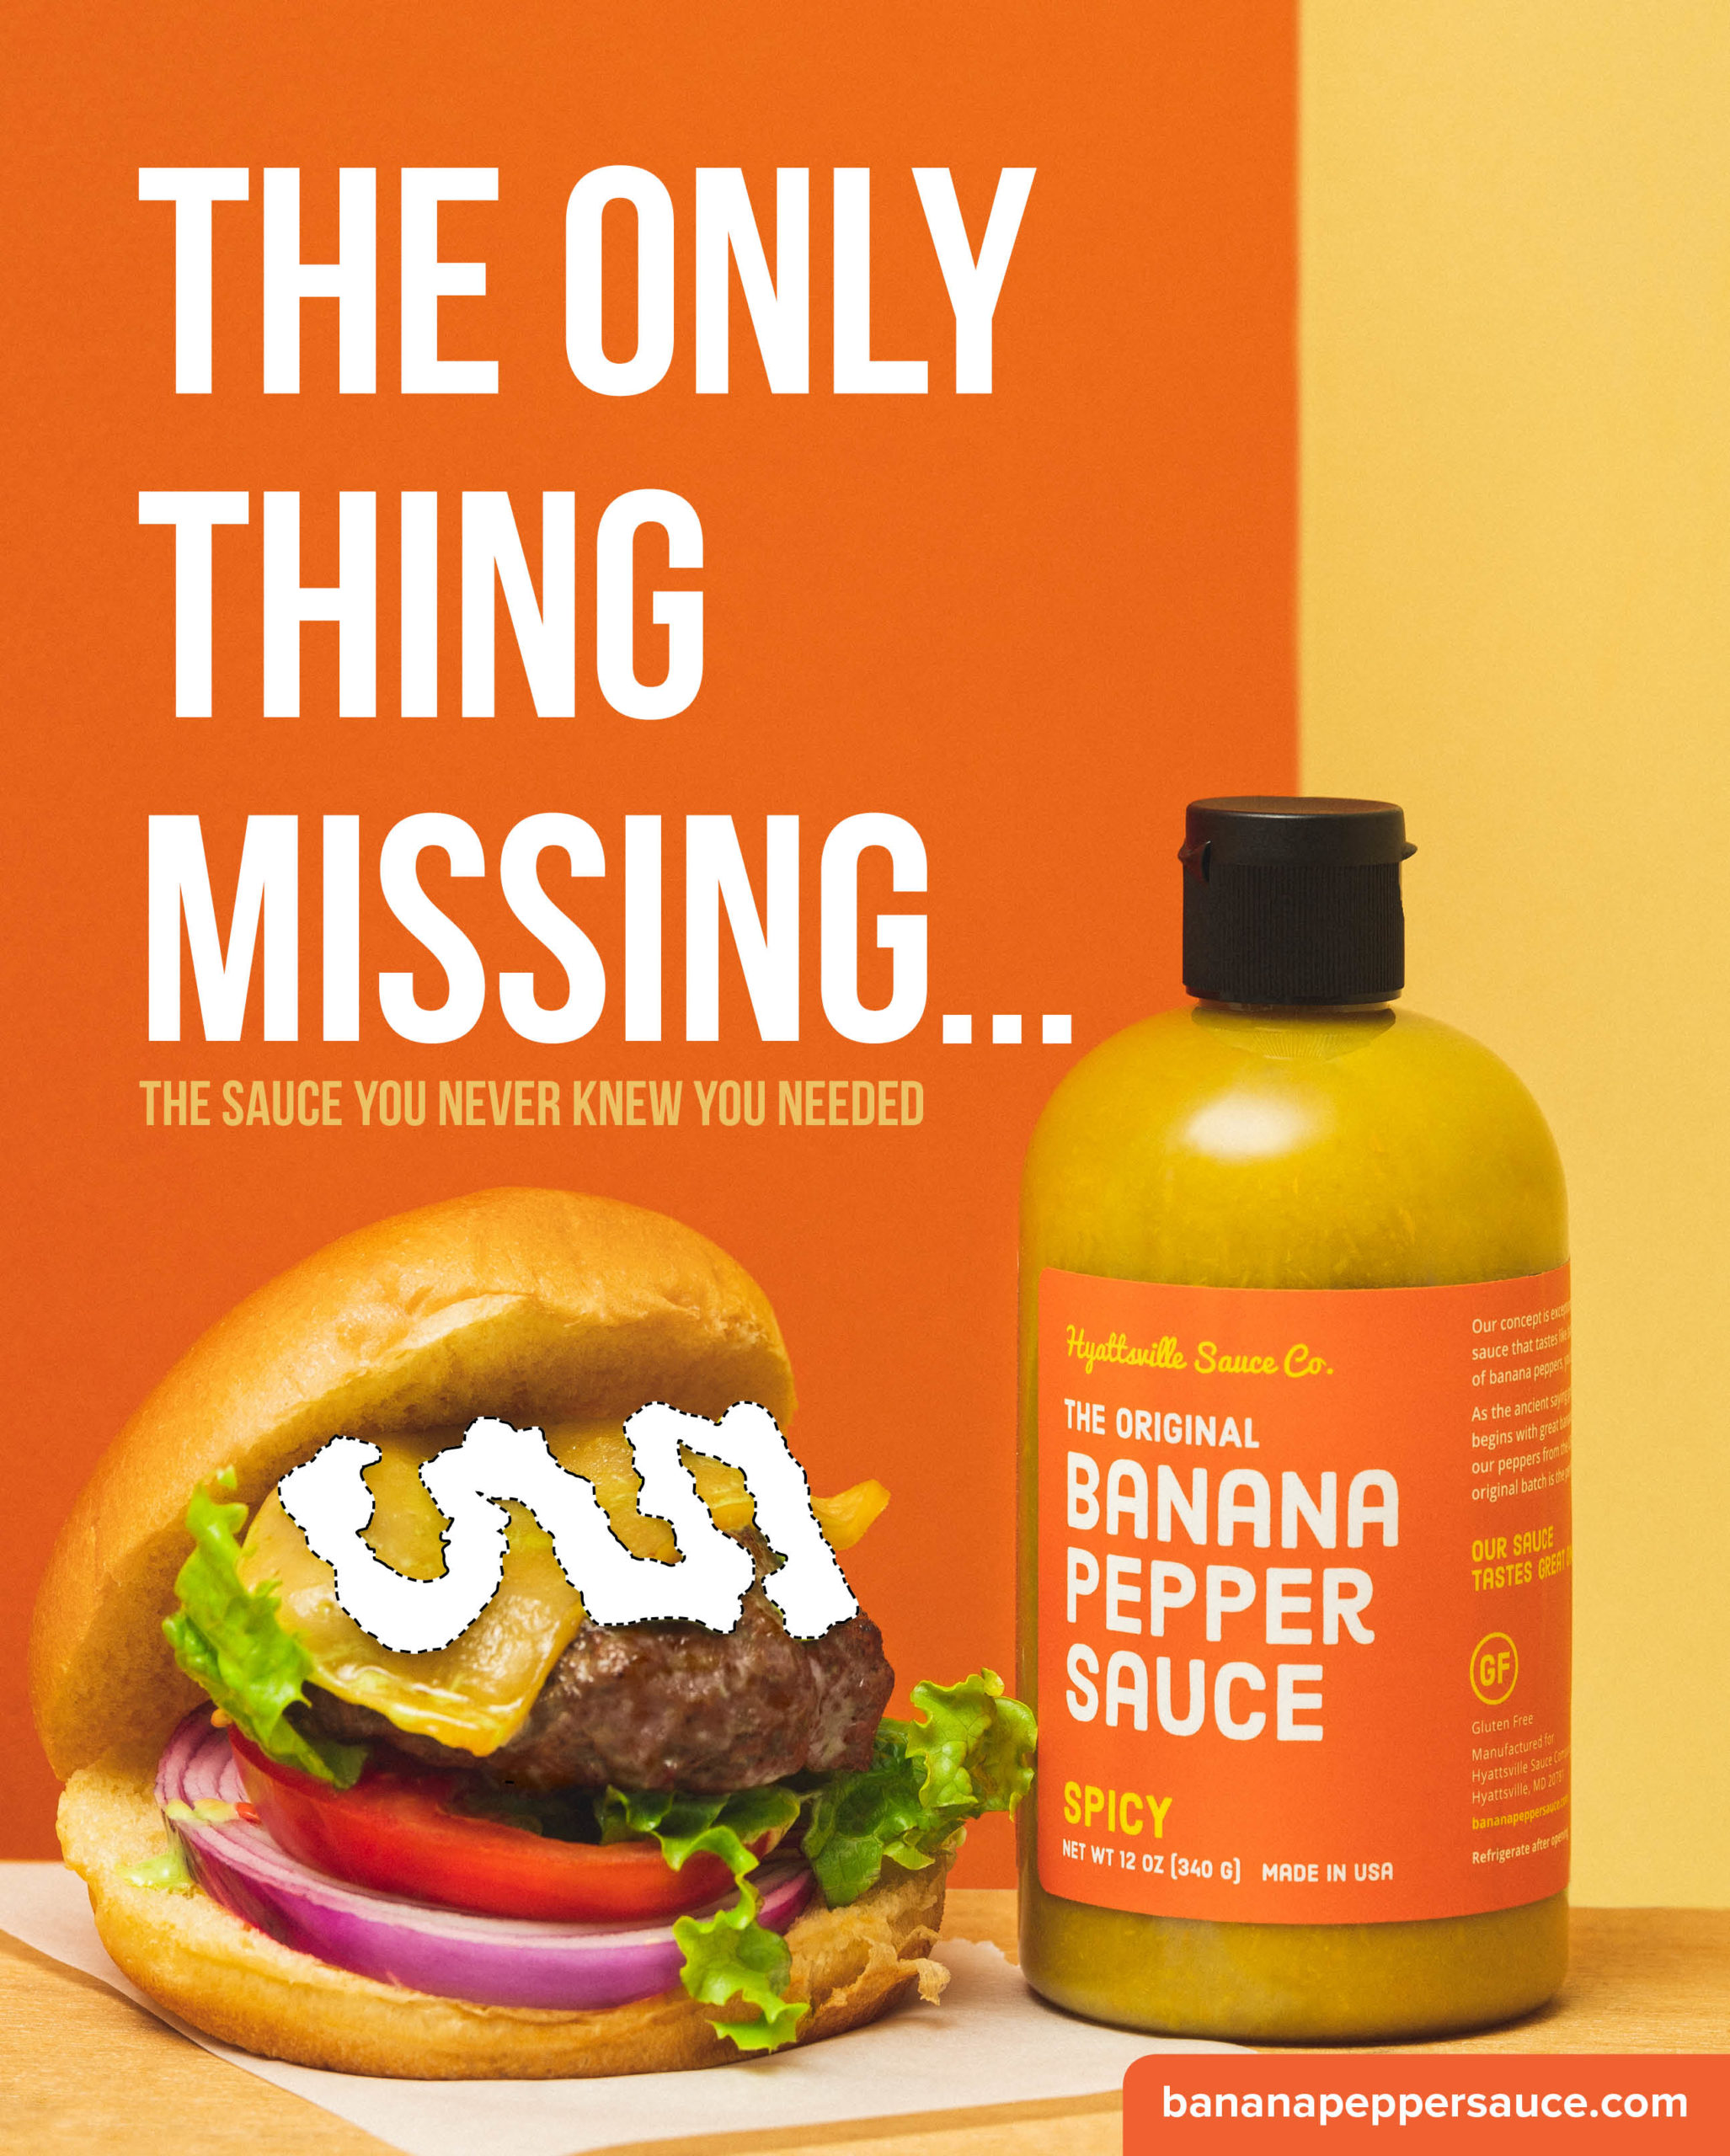 Hyattsville Sauce Company The Original Banana Pepper Sauce bottle Spicy flavor next to cheeseburger graphic with slogan and website address